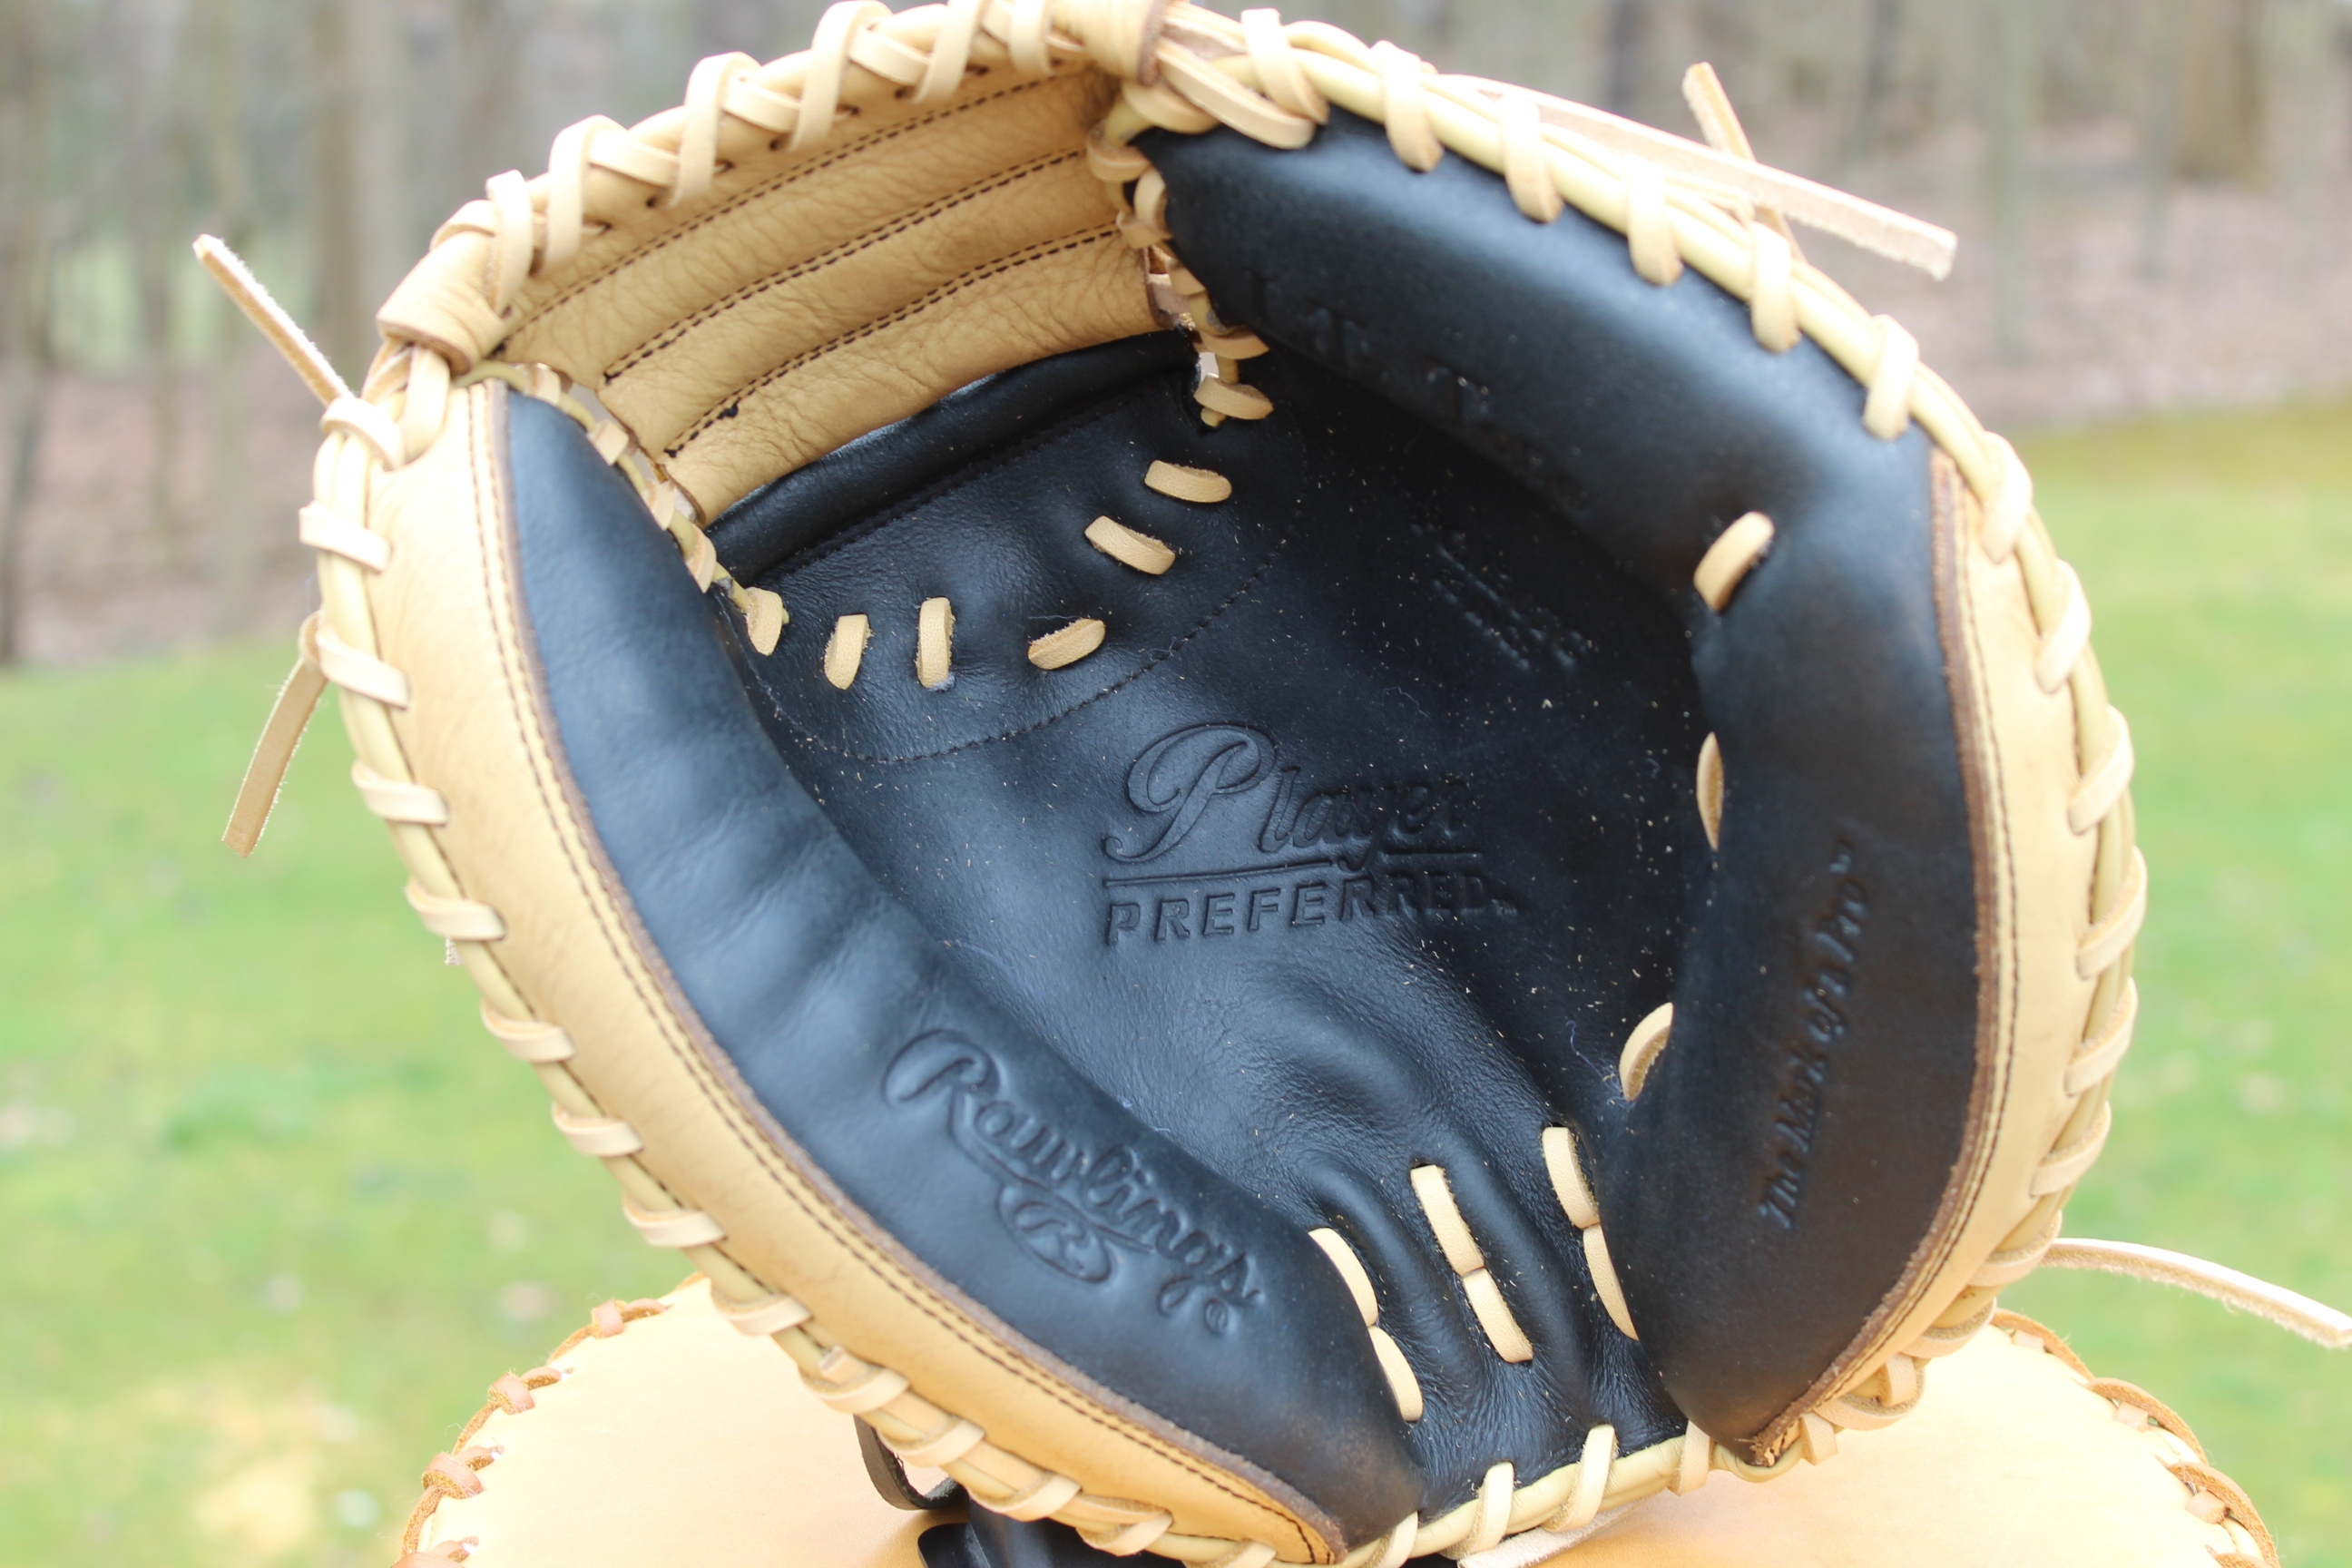 Used Rawlings Catcher's Right Hand Throw Player Preferred Baseball Glove 33"